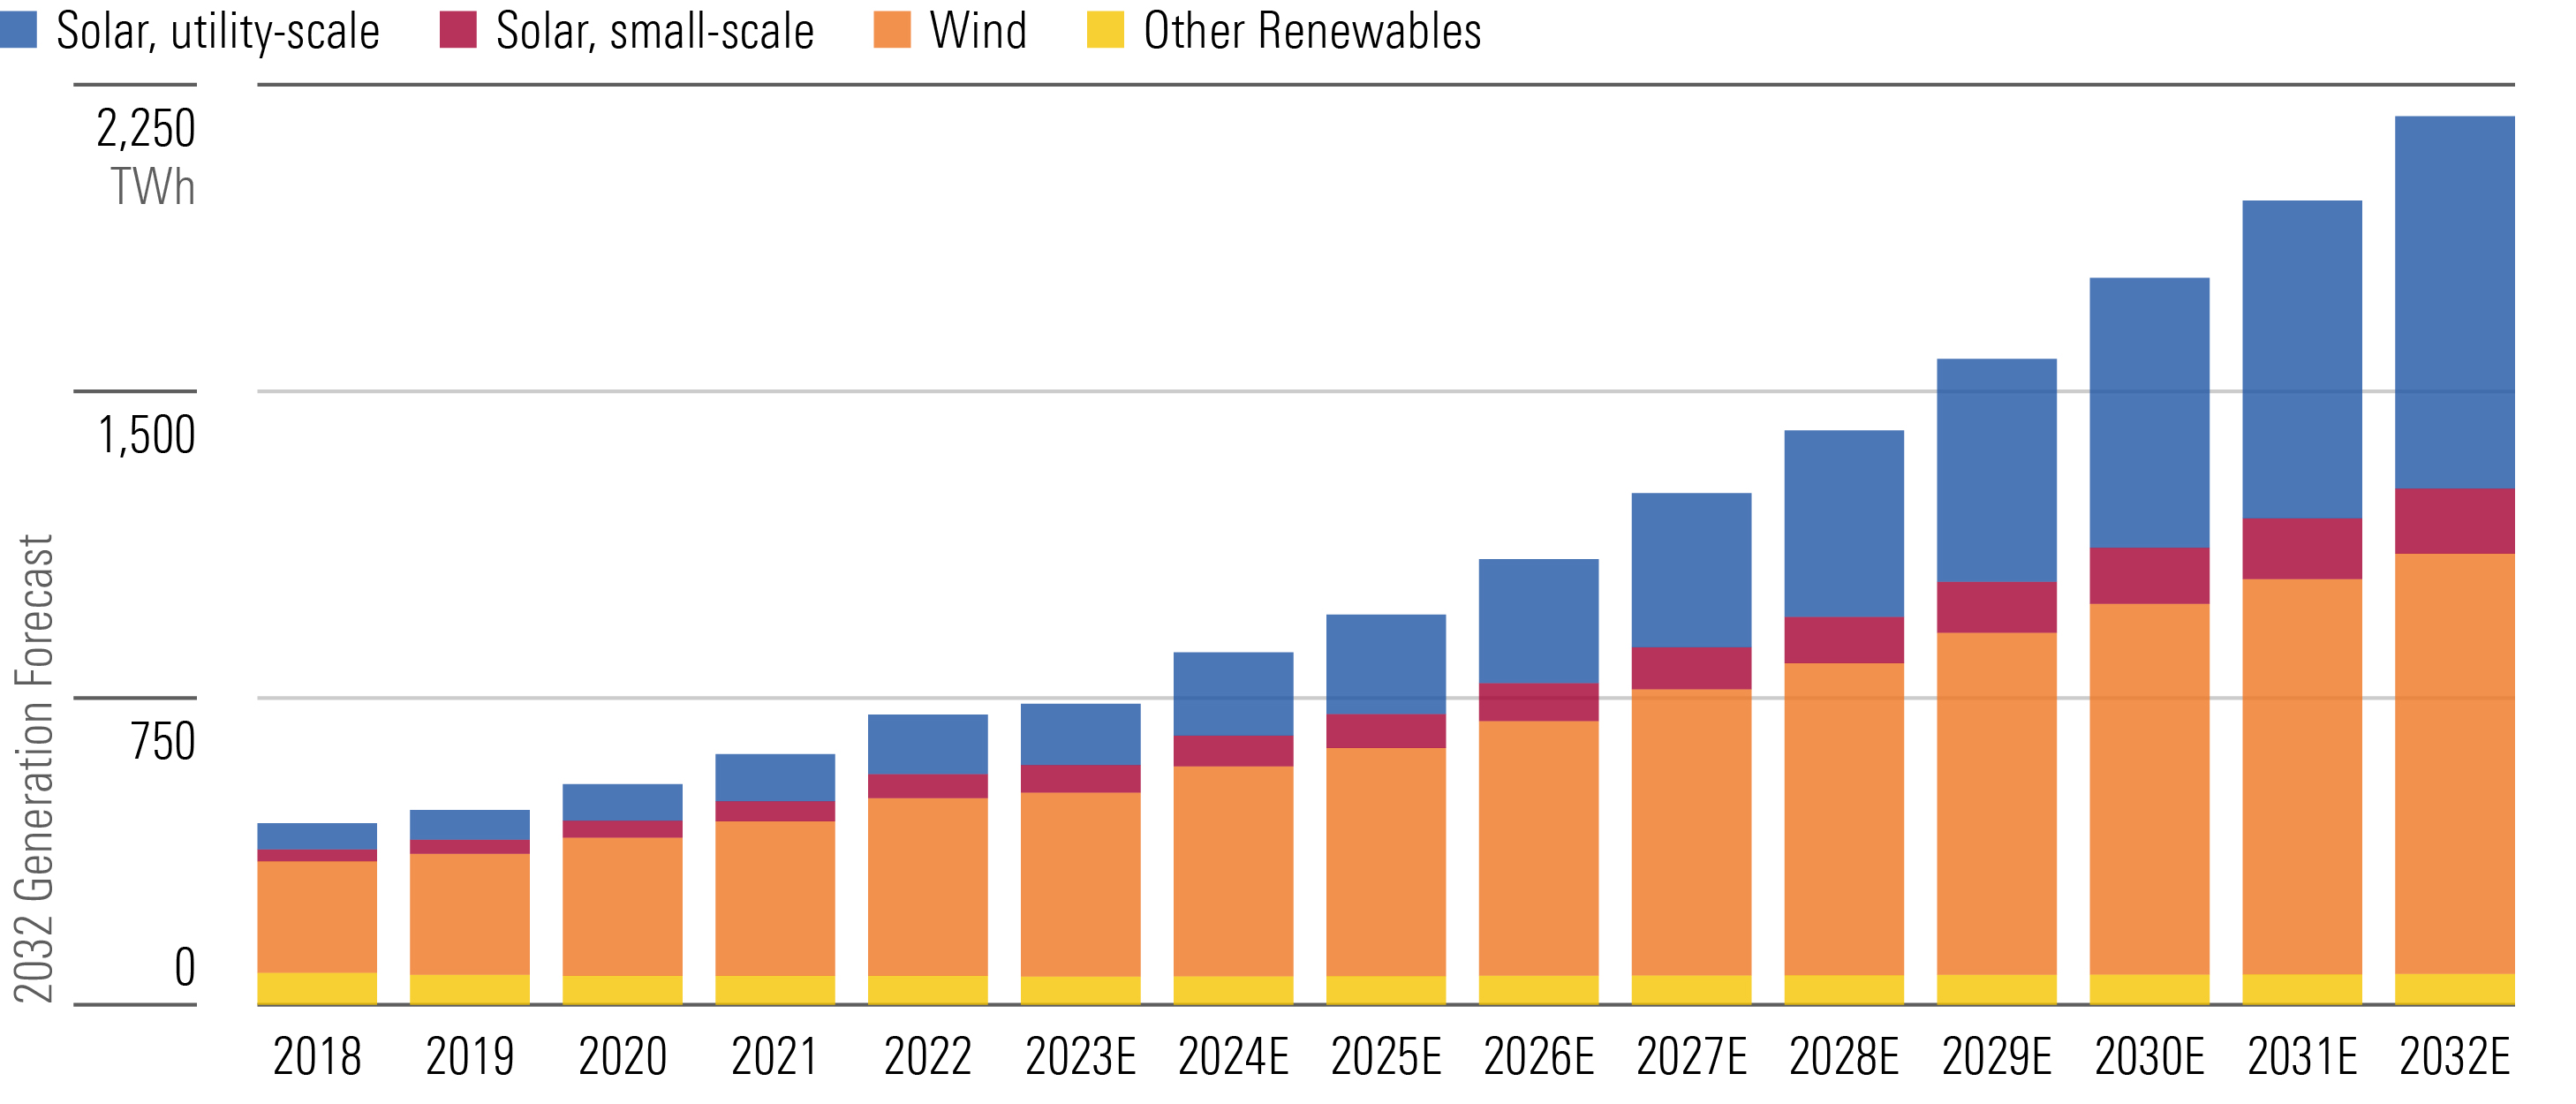 Our 10-Year Utilities Forecast: Renewable Energy to Triple by 2032